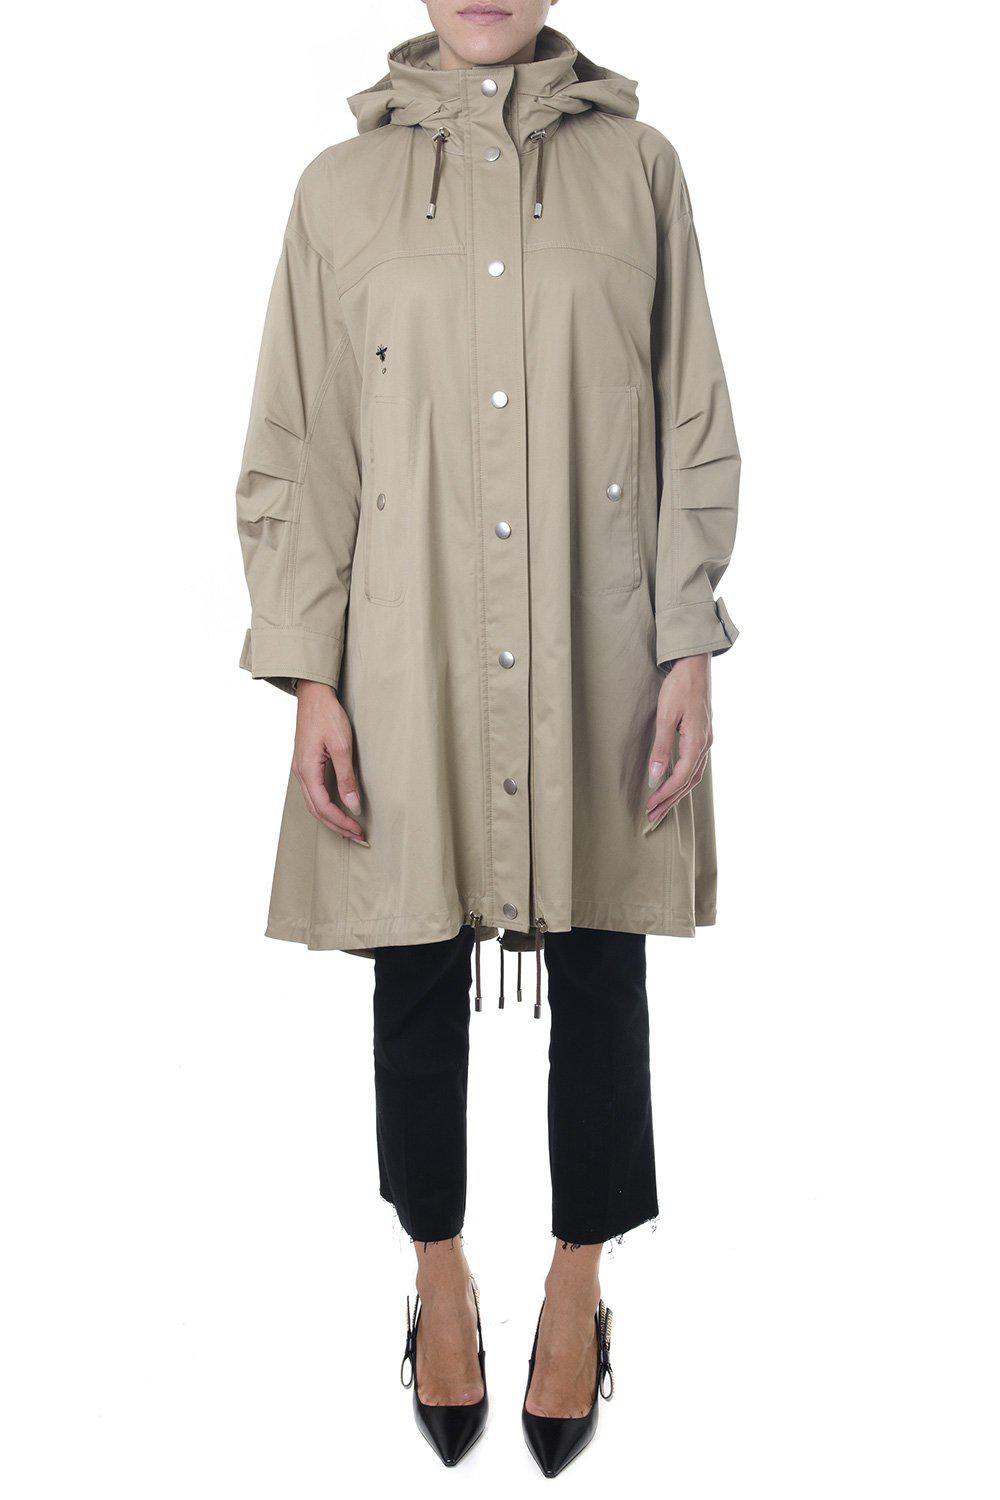 Dior Hooded Raincoat in Natural | Lyst